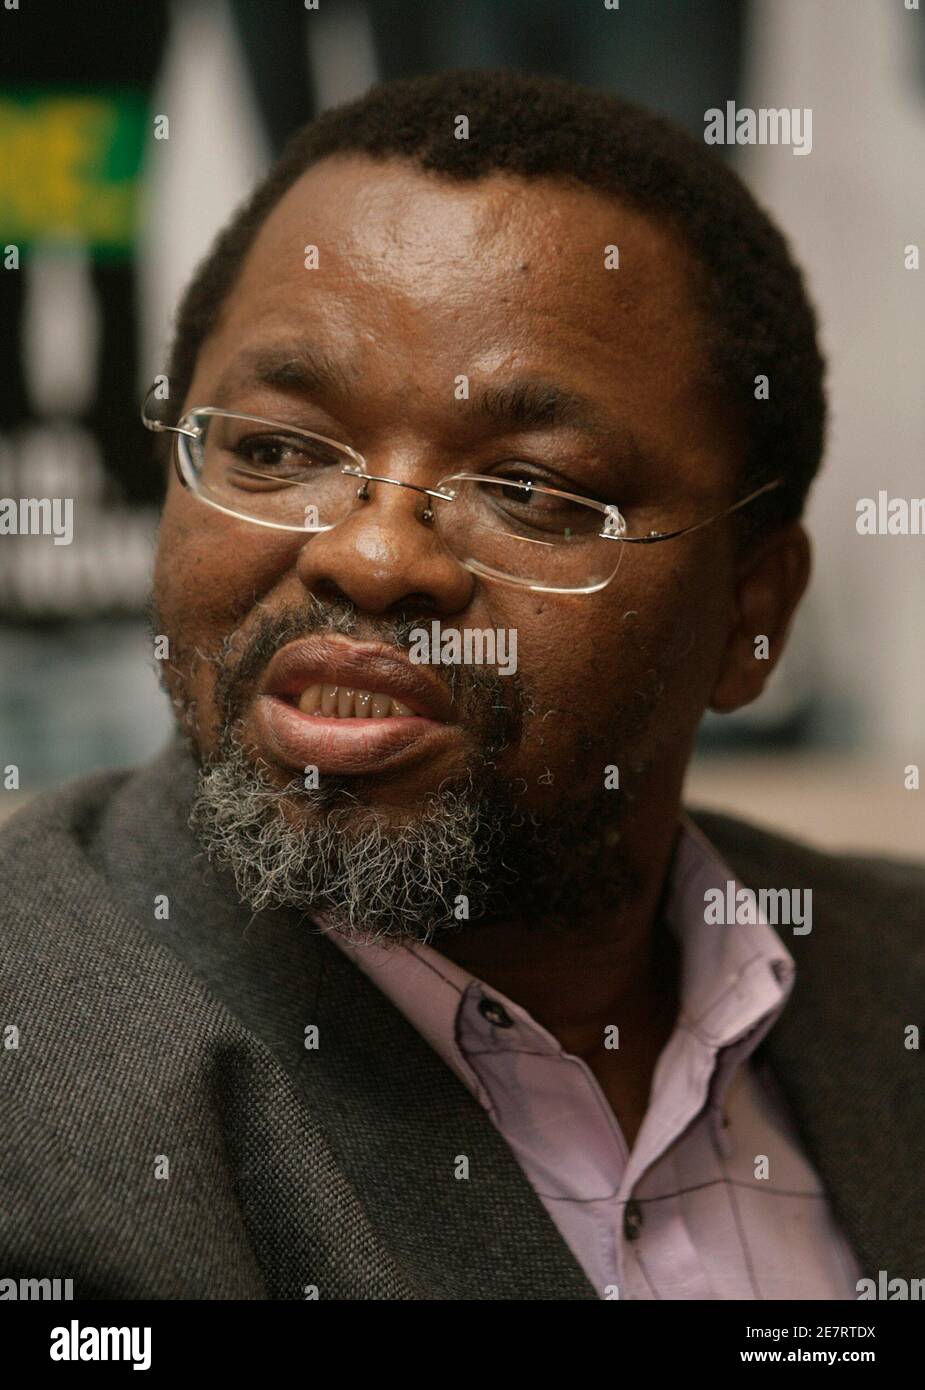 Gwede Mantashe High Resolution Stock Photography and Images - Alamy